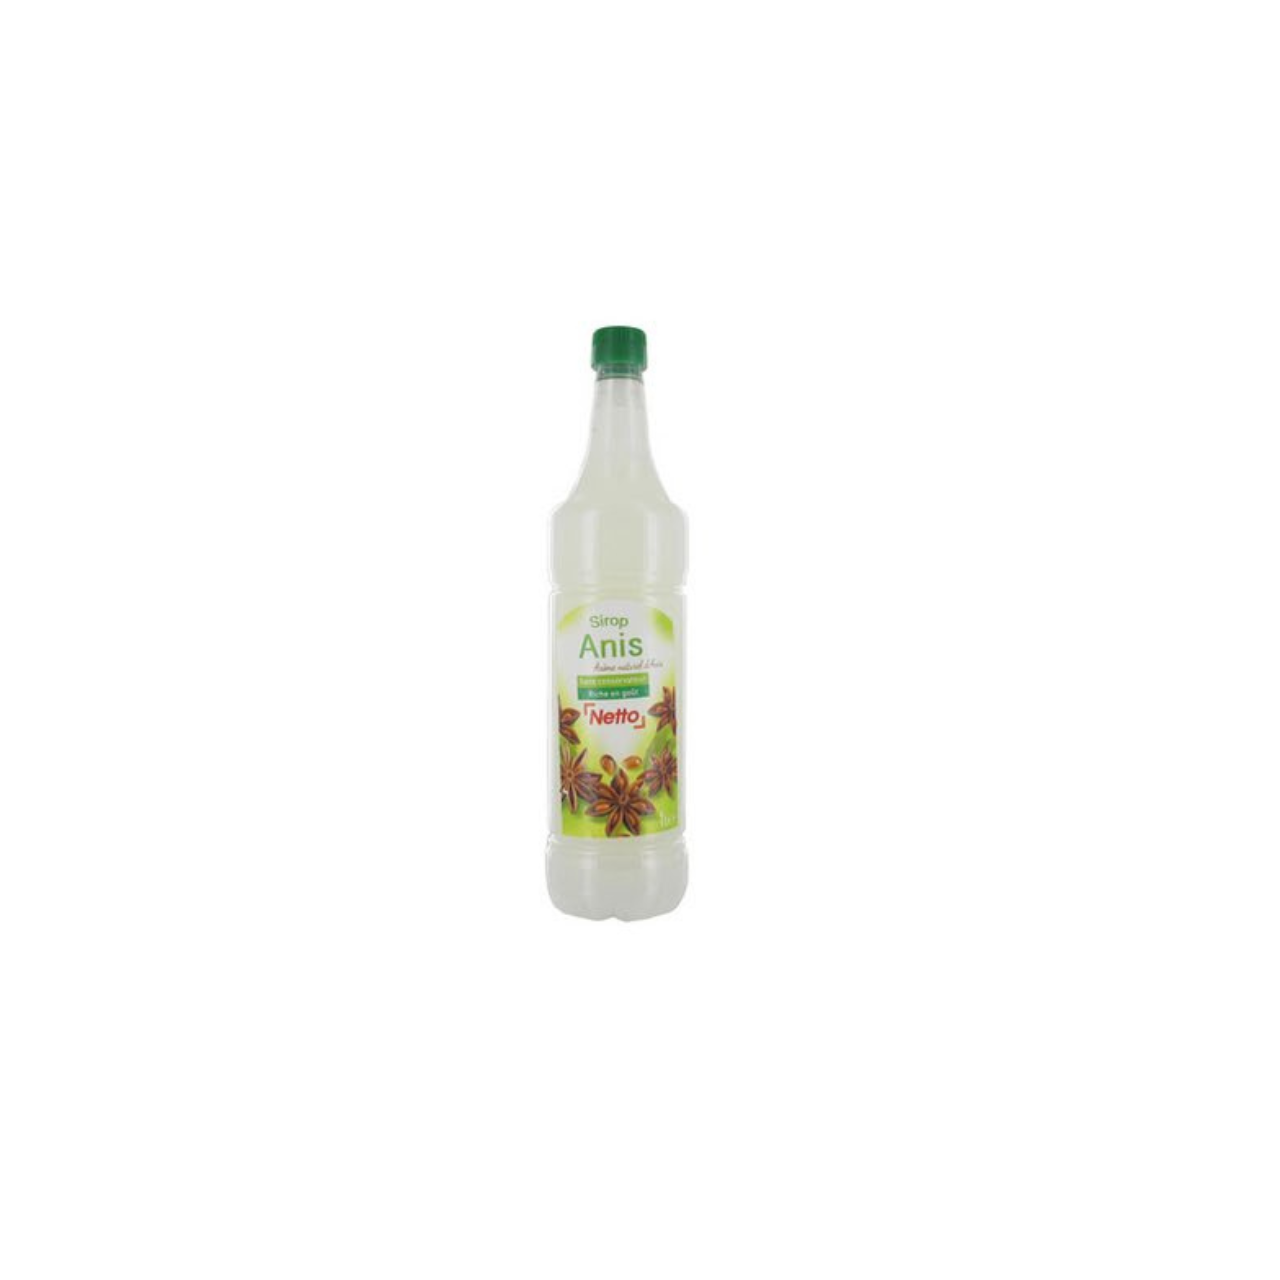 NETTO Anise syrup 75cl BBD 08/30/2024 -E44